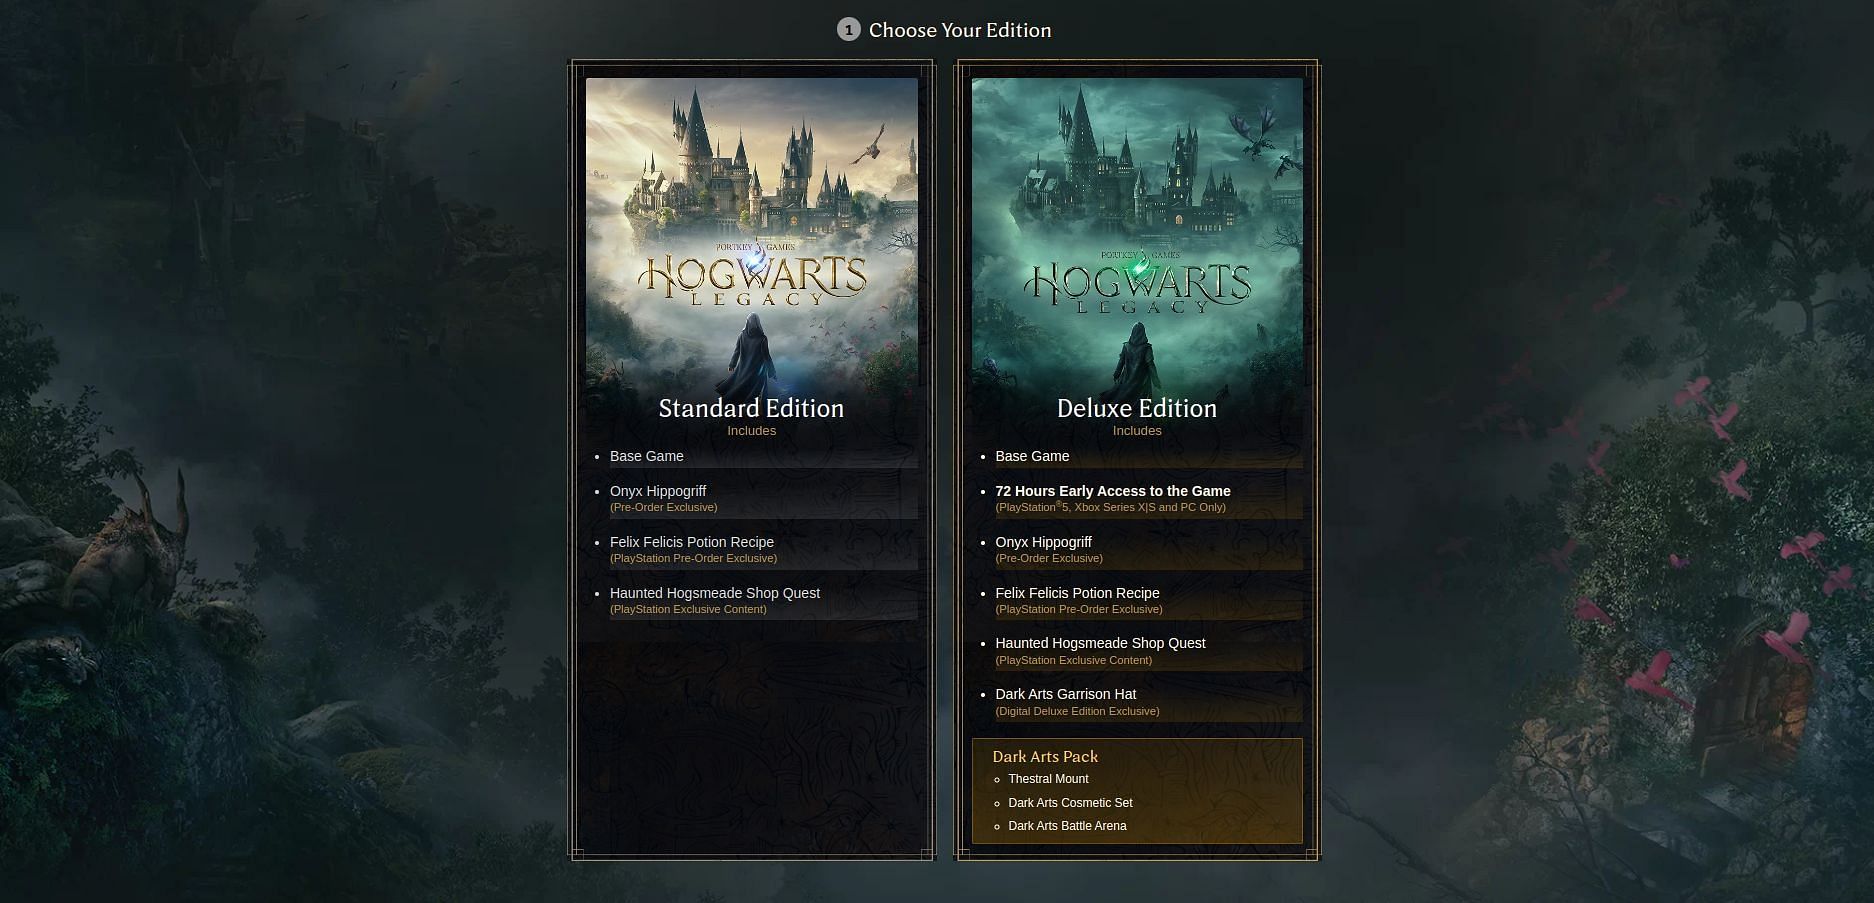 The Standard and Deluxe editions of the game compared (Image via Portkey Games)